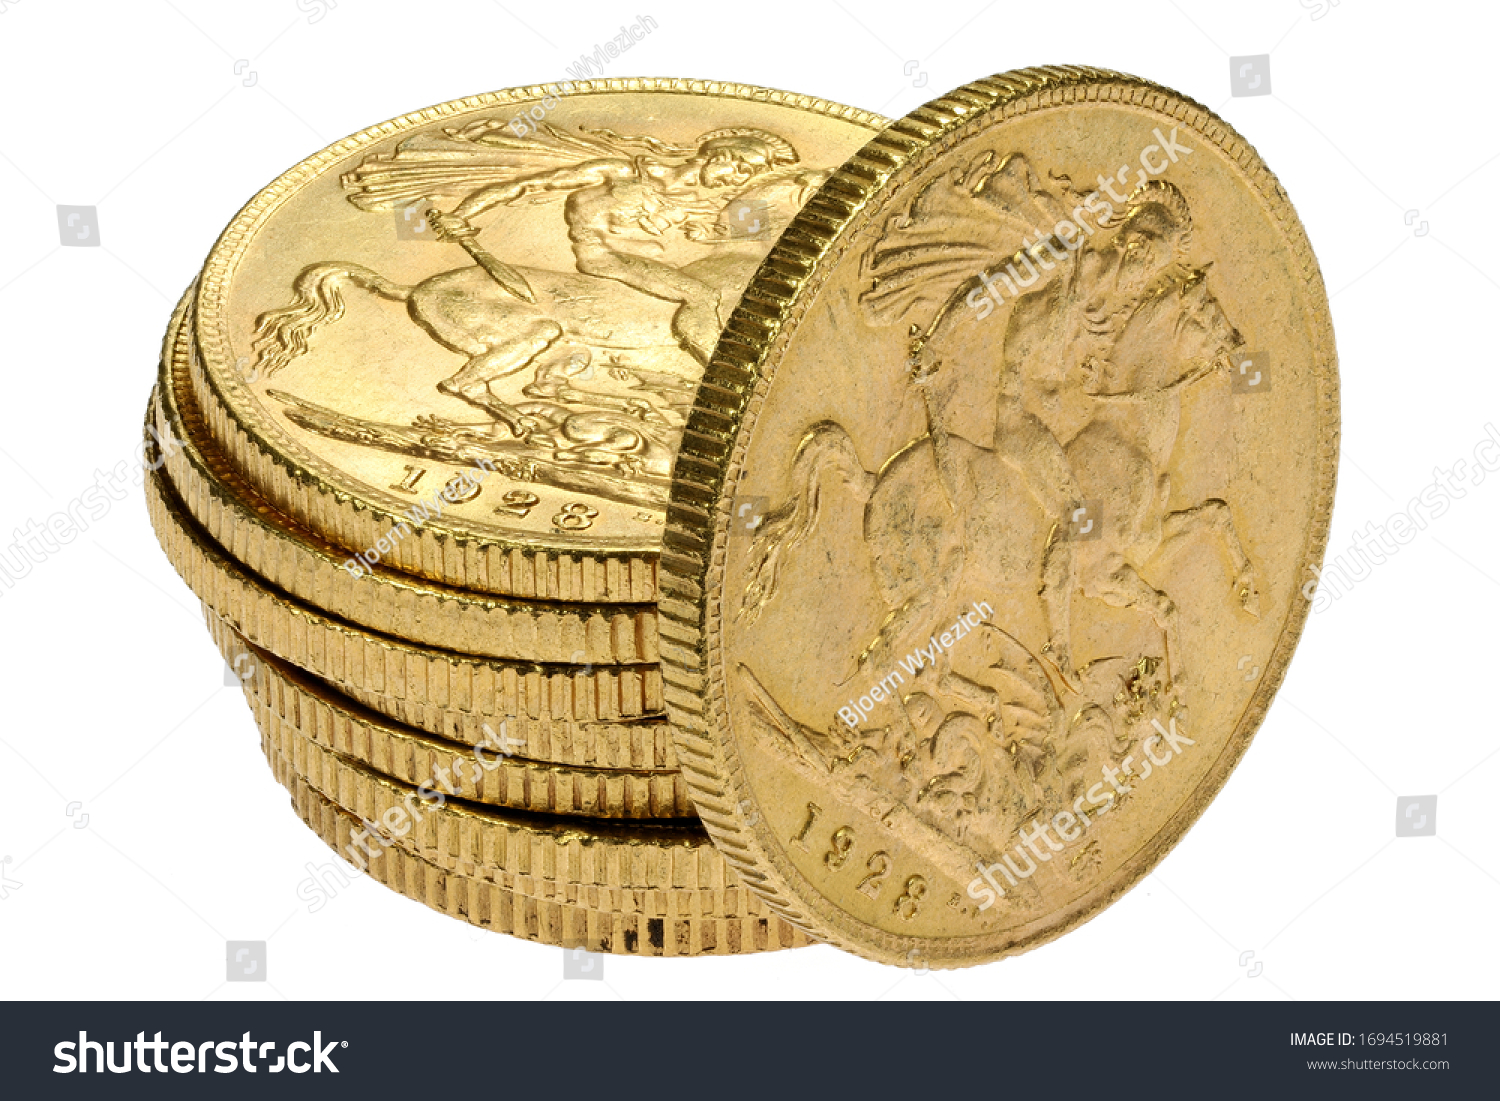 British full Sovereign gold coins isolated on white background #1694519881